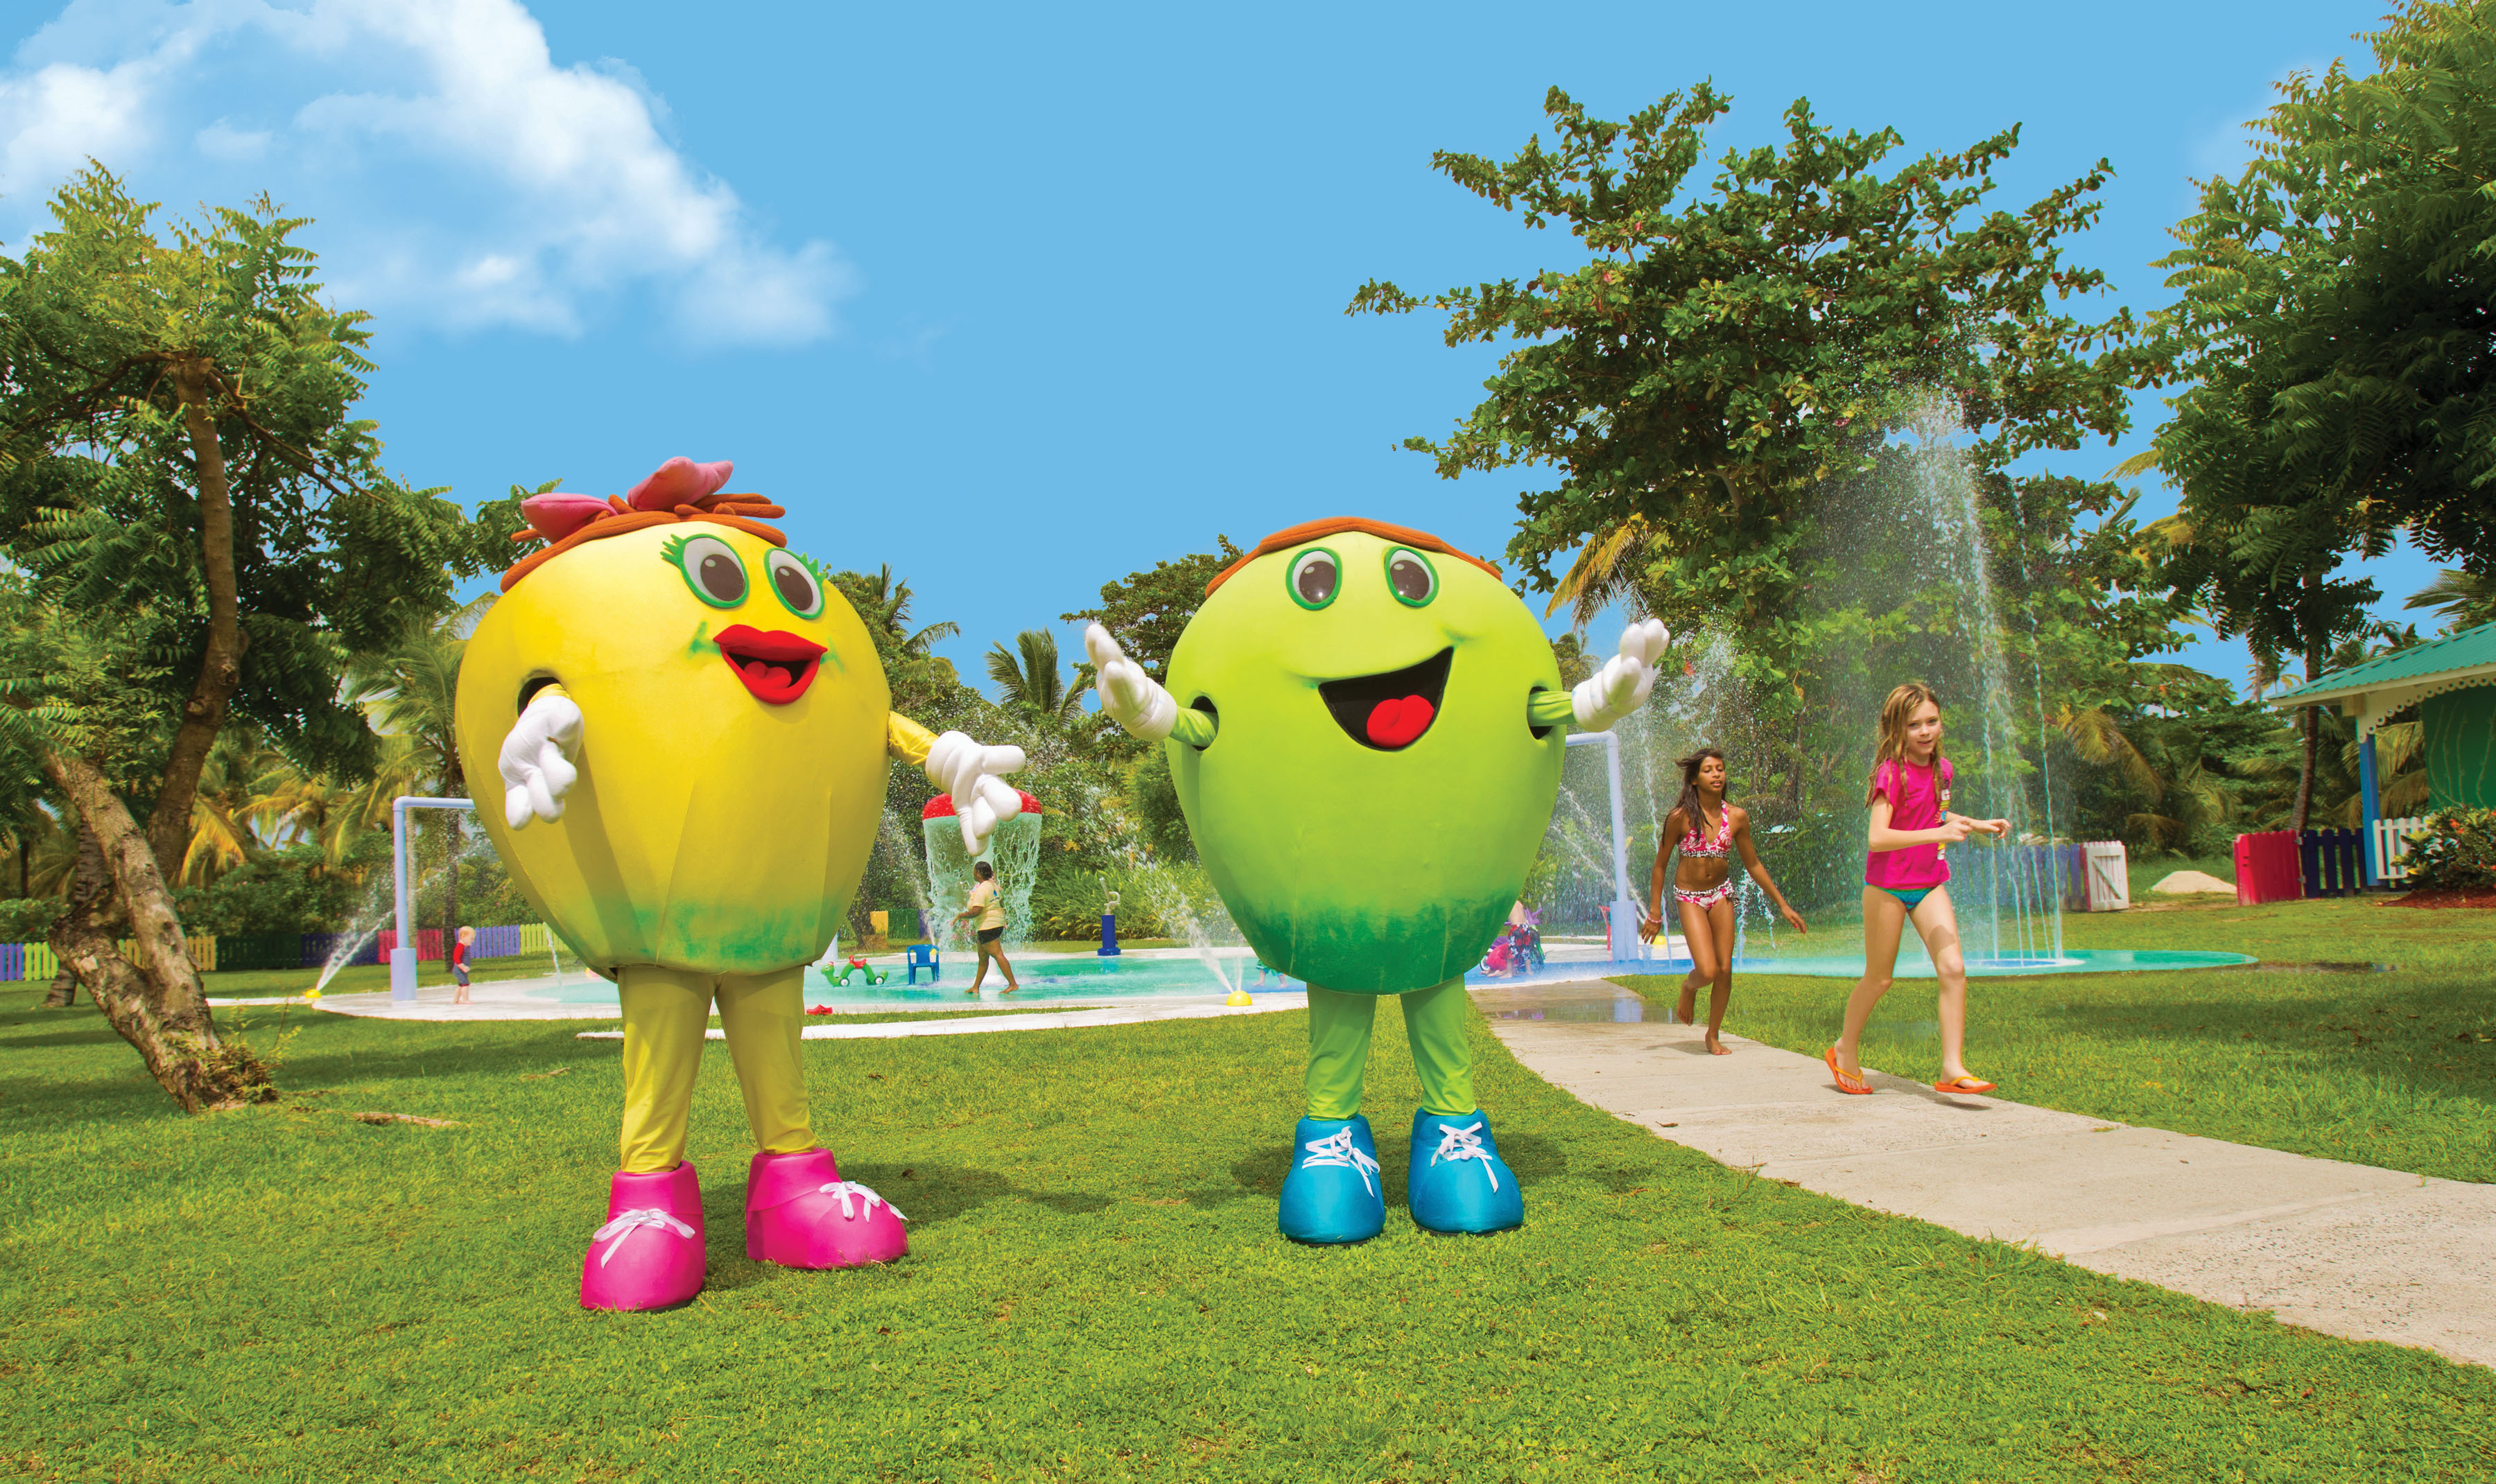 Coconut Bay Beach Resort & Spa's fun-loving staff along with resort mascots Coco and Loco welcome infants to 12 year-olds to the CocoLand Kidz Klub.